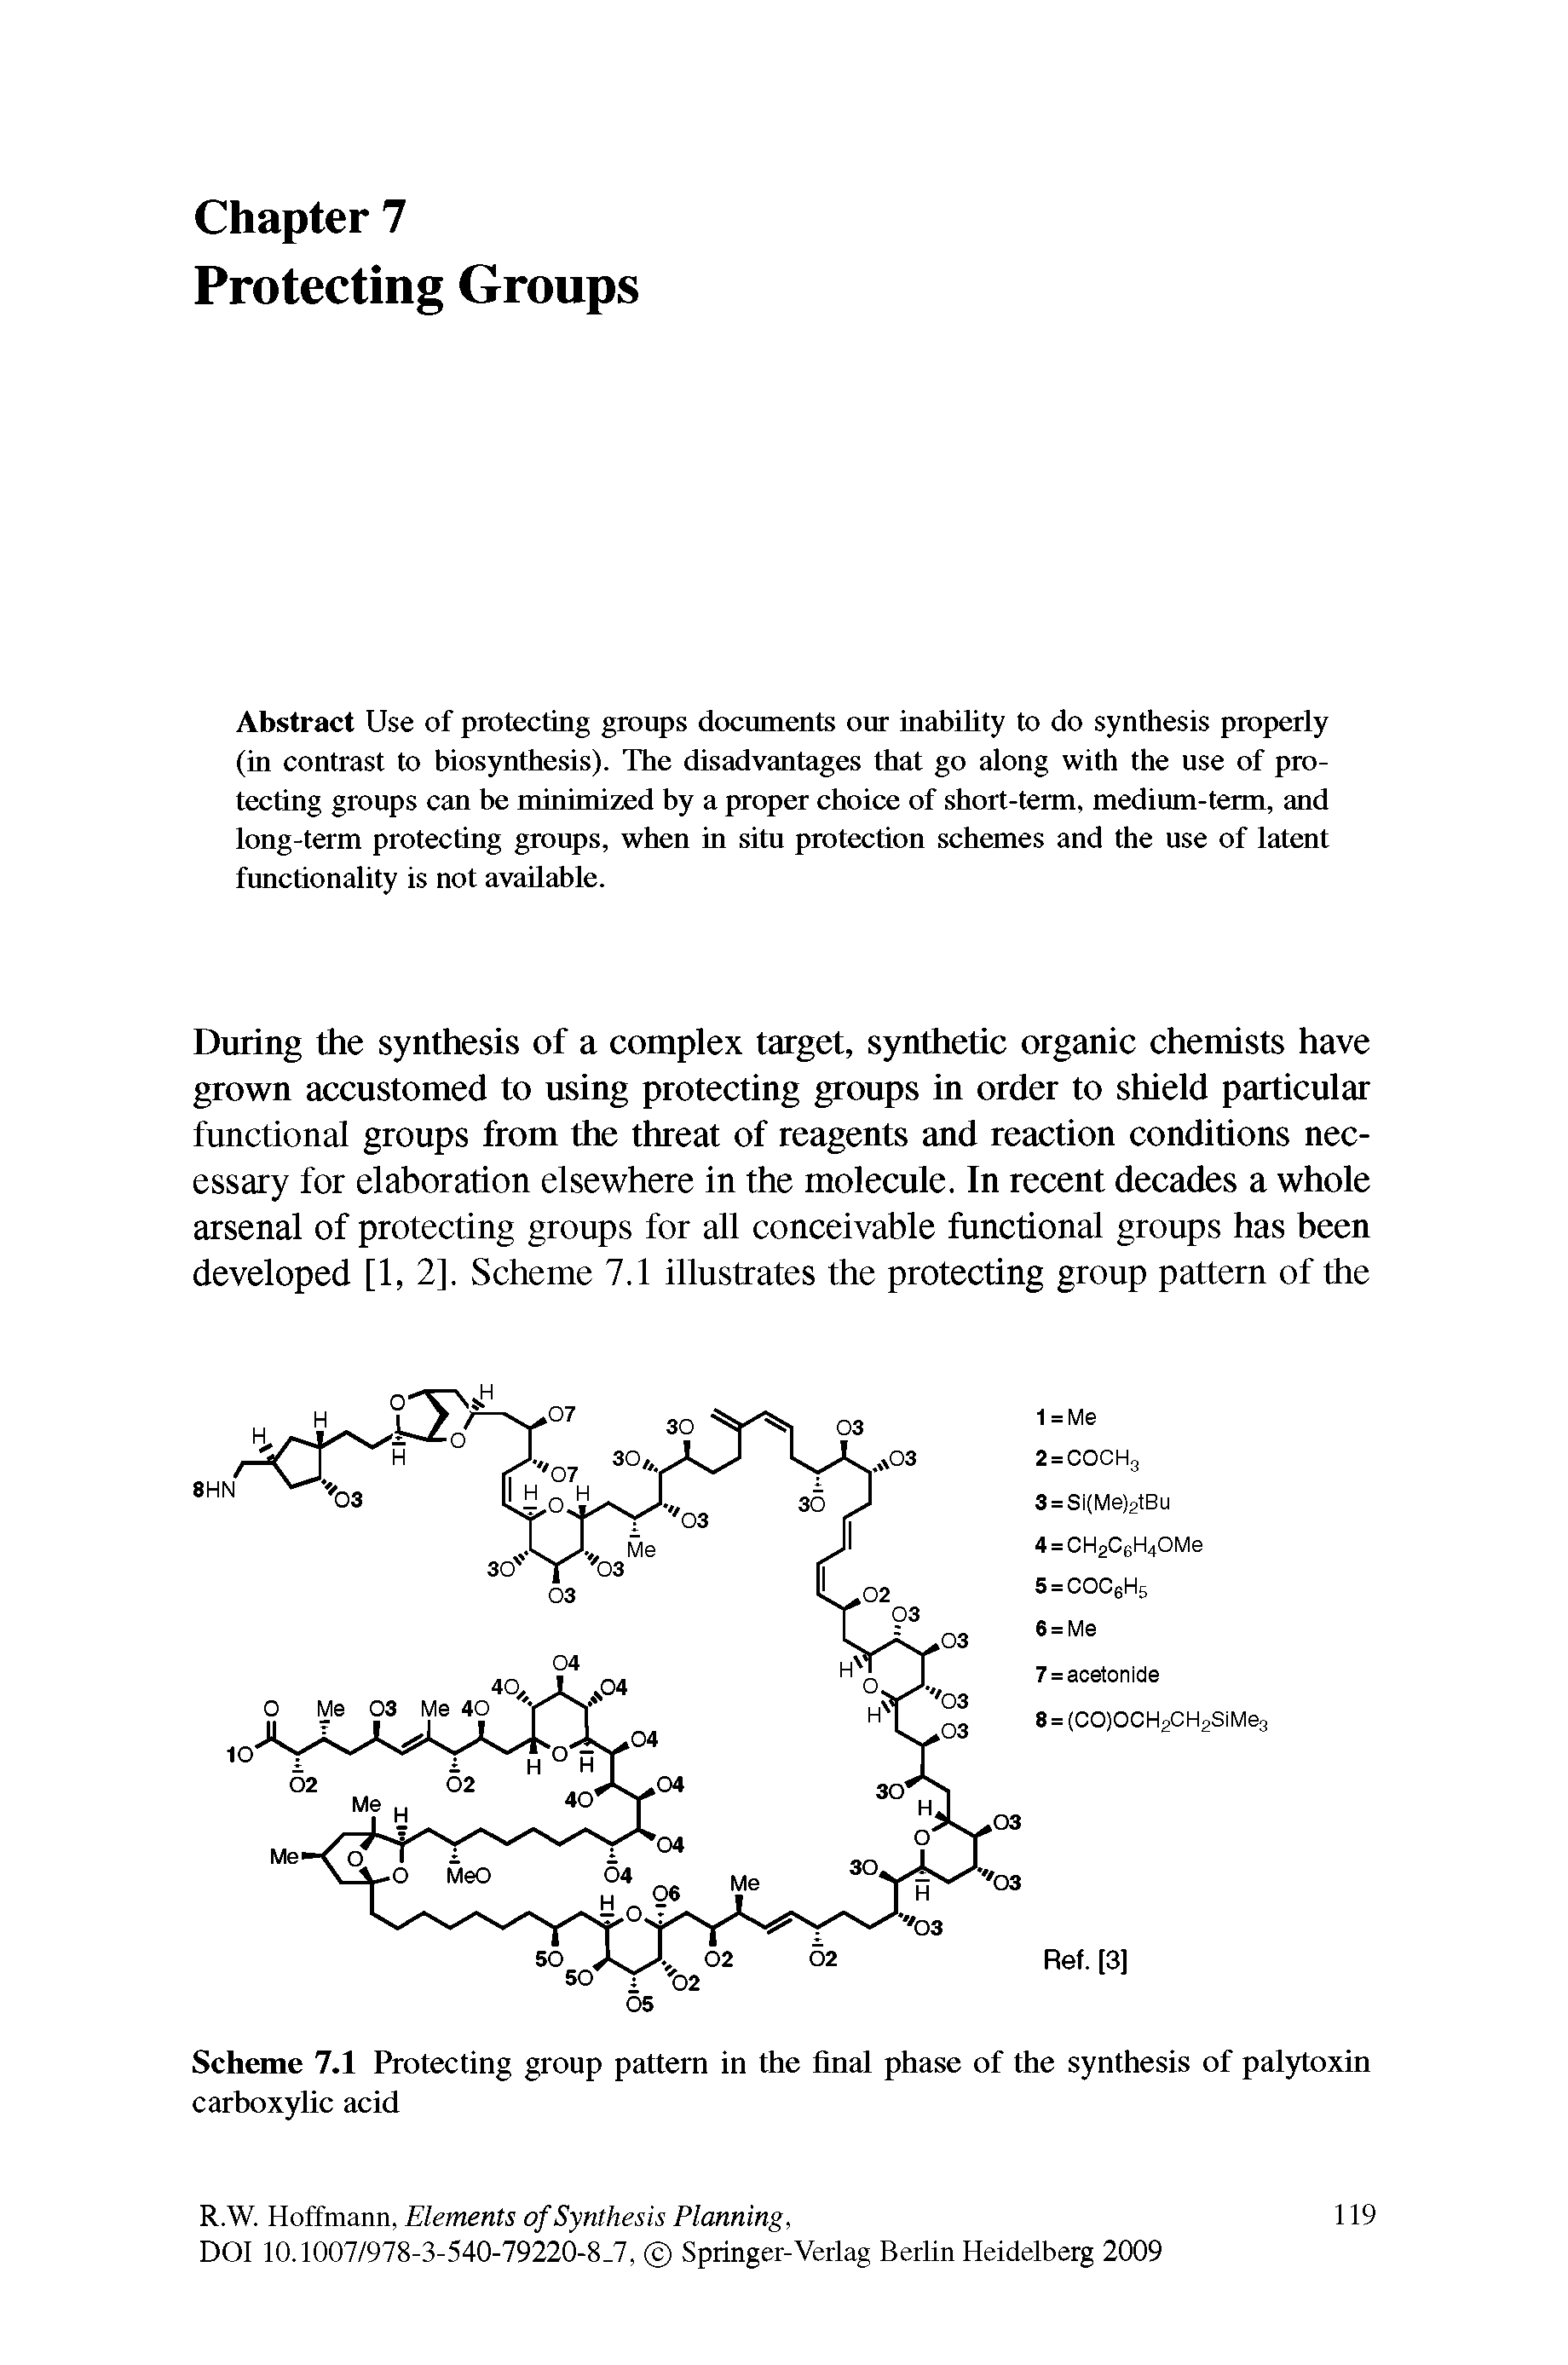 Scheme 7.1 Protecting group pattern in the final phase of the synthesis of palytoxin carboxyUc acid...